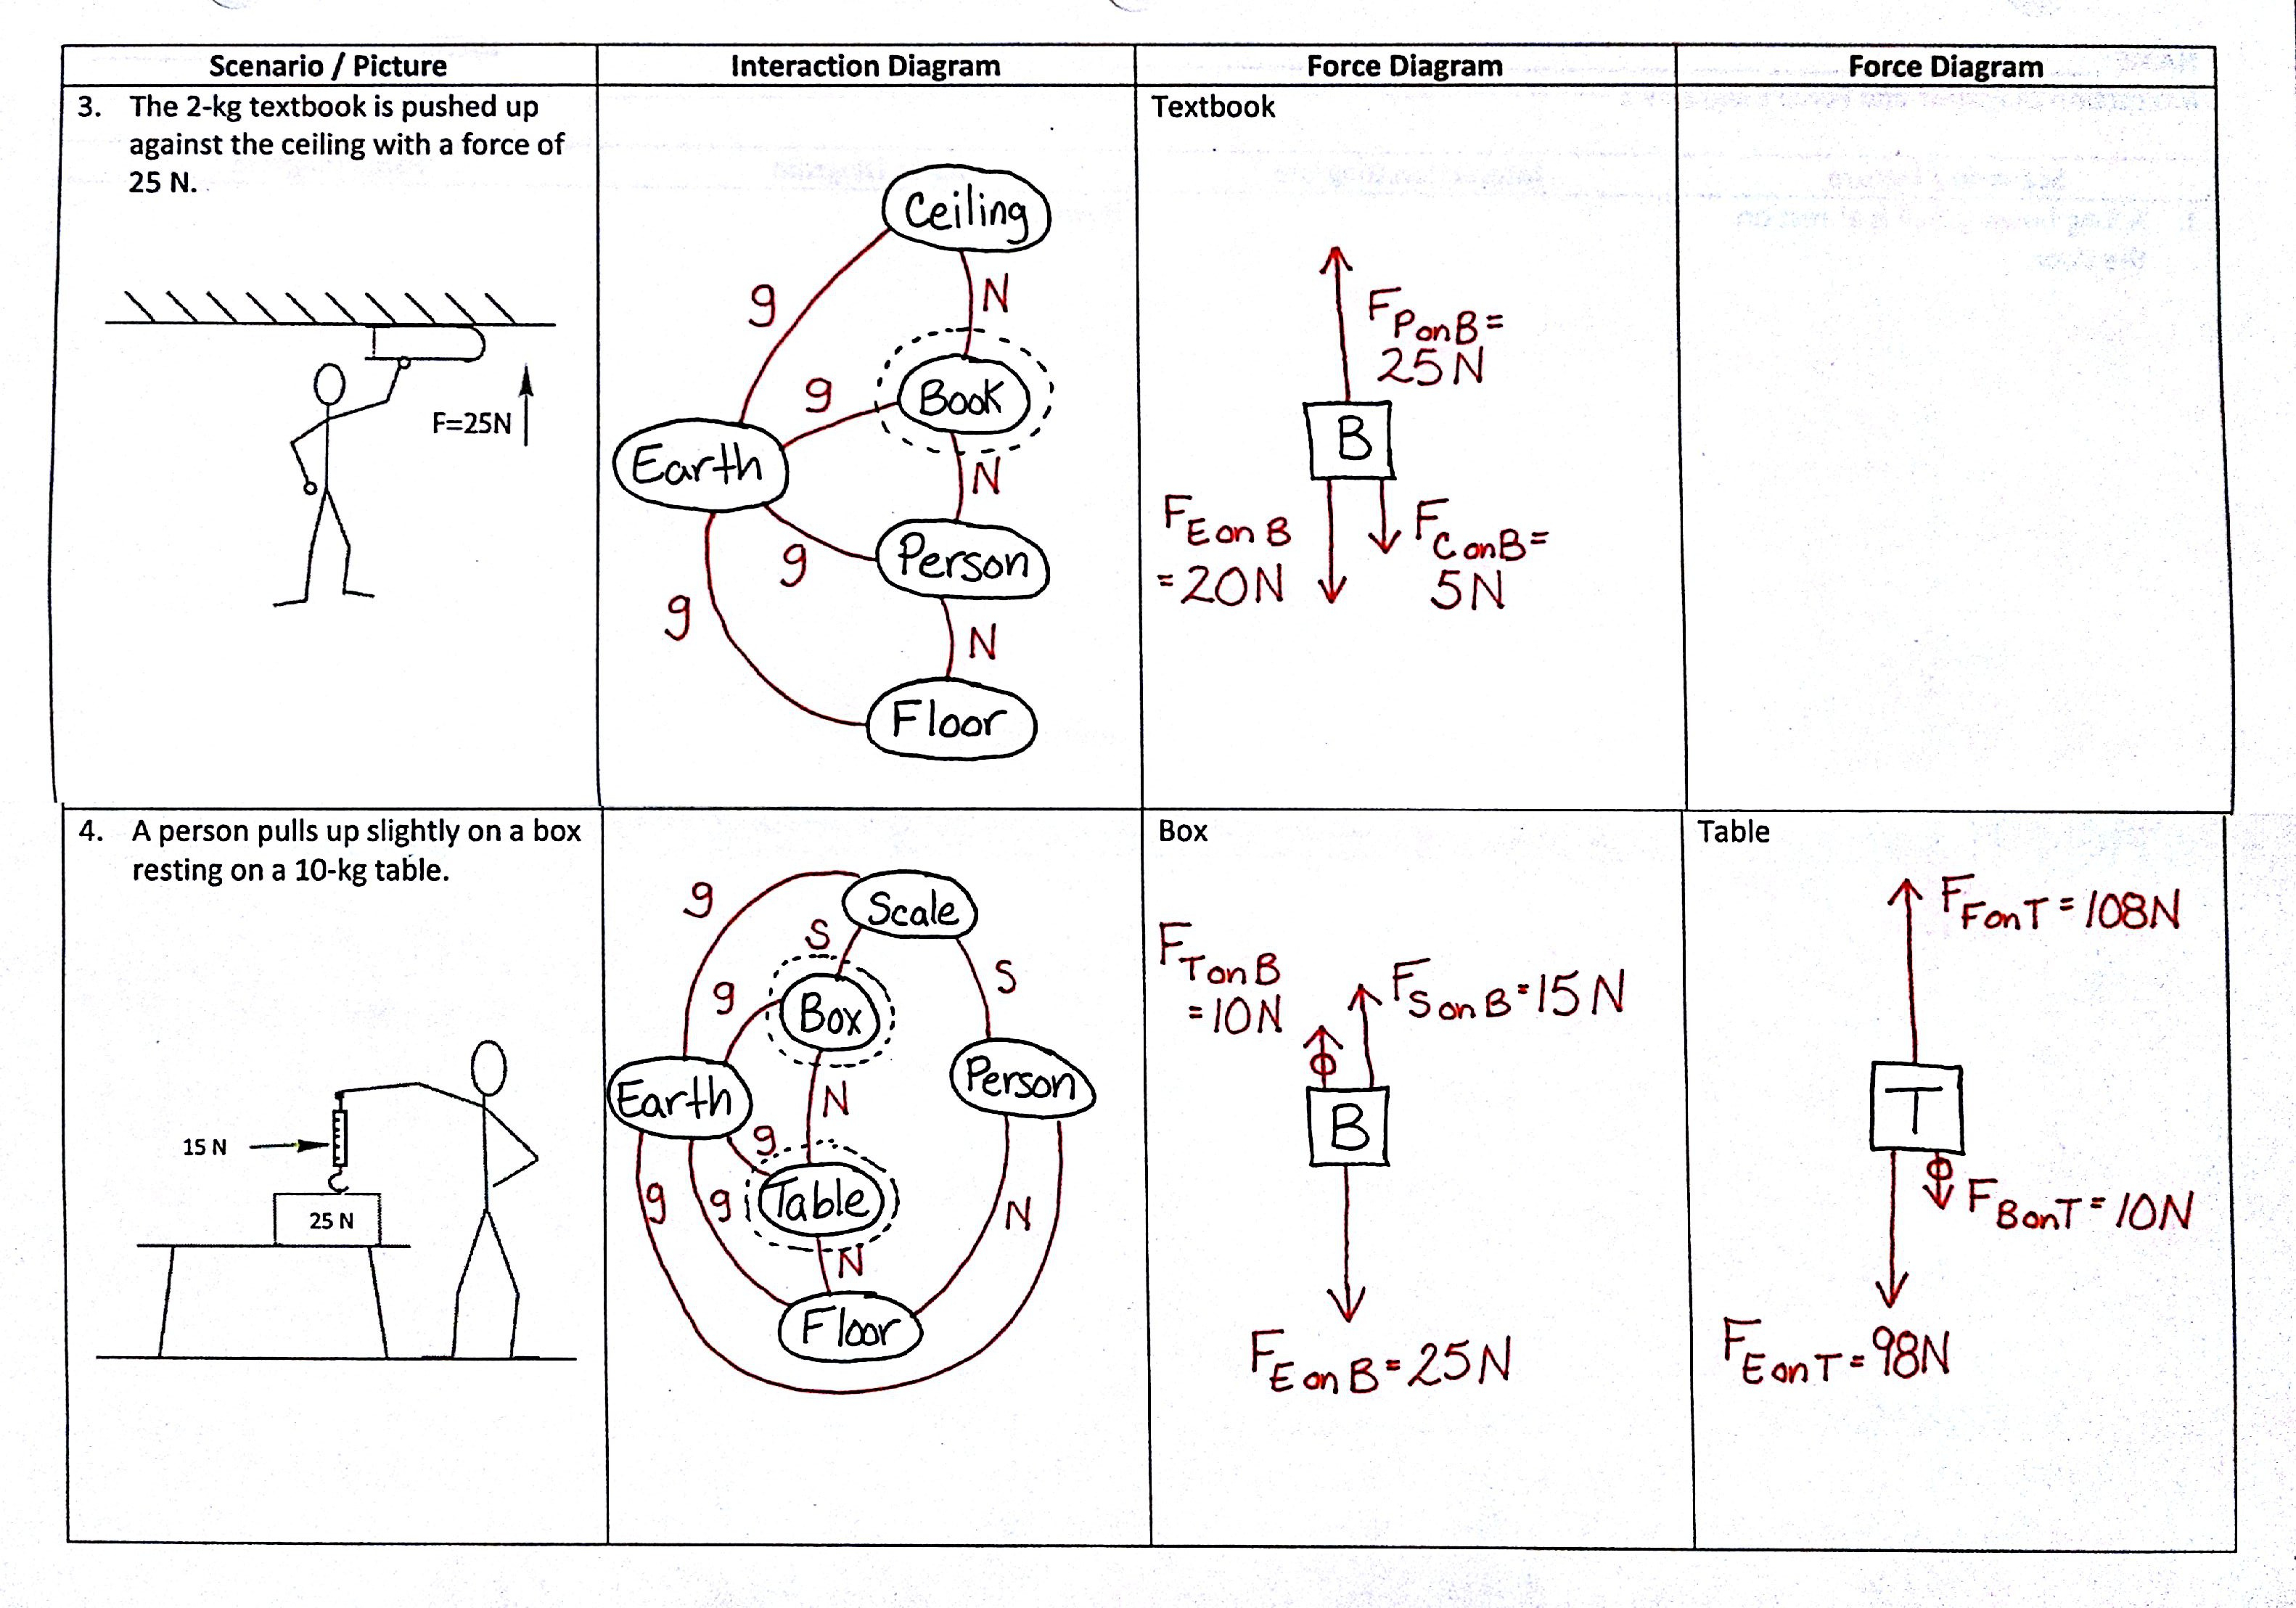 Free Body Diagram Worksheet Day 32 Interaction Diagrams And Force Diagrams Noschese 180